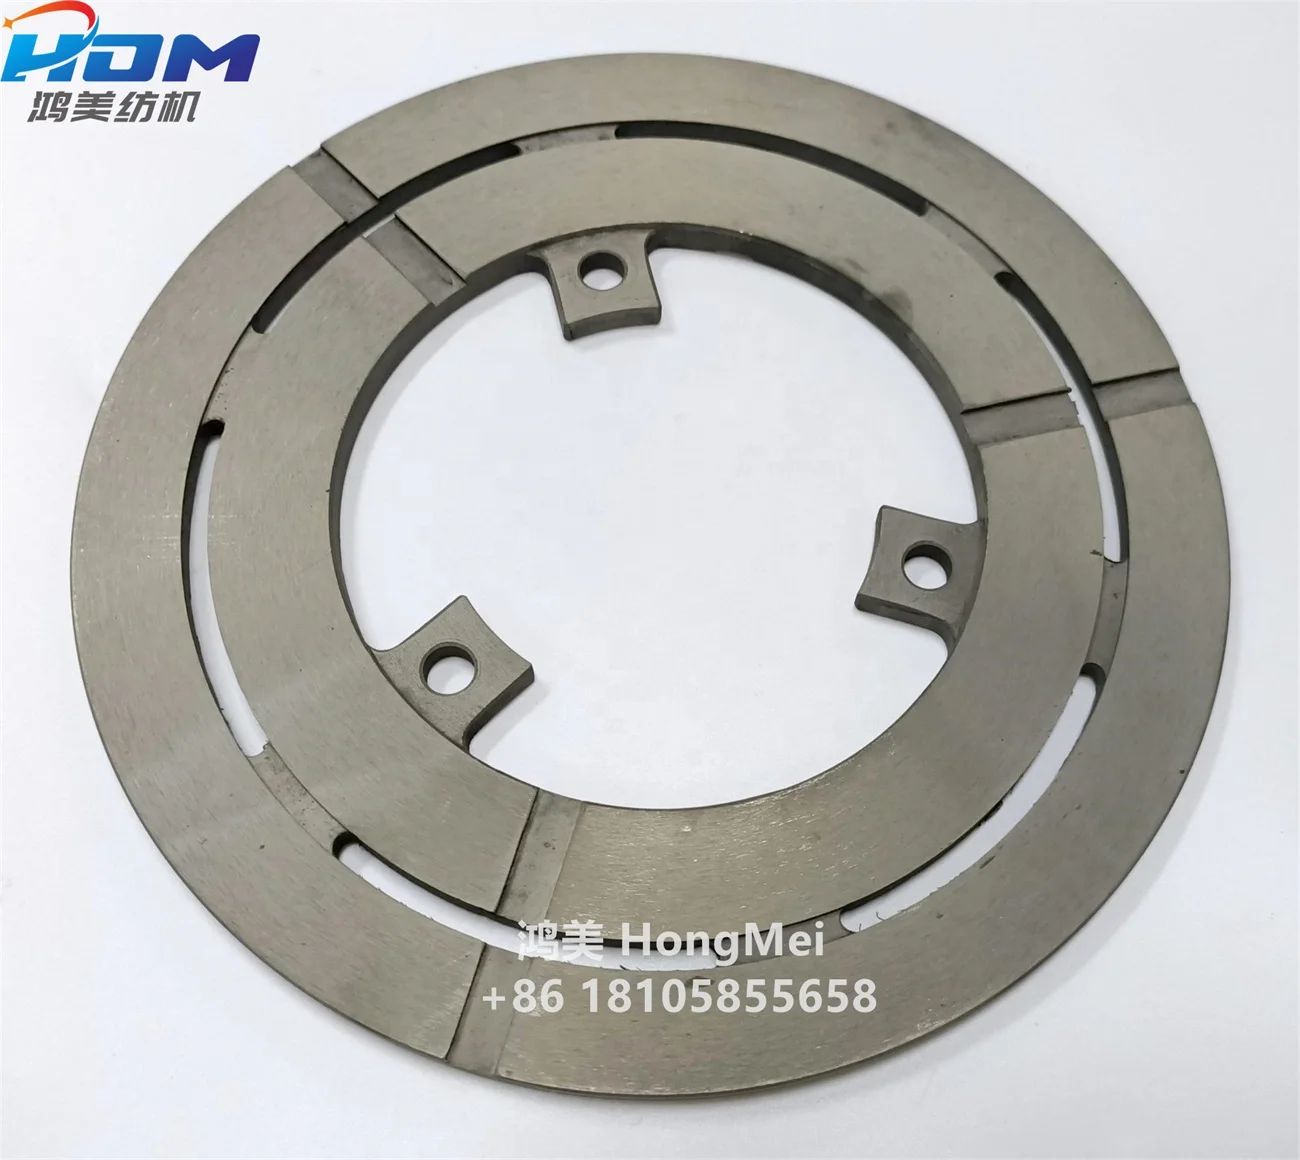 HOWO Heavy Truck Engine Spare Parts Flywheel Ring Gear (Vg2600020208) -  ChinaTruckSuppliers.com